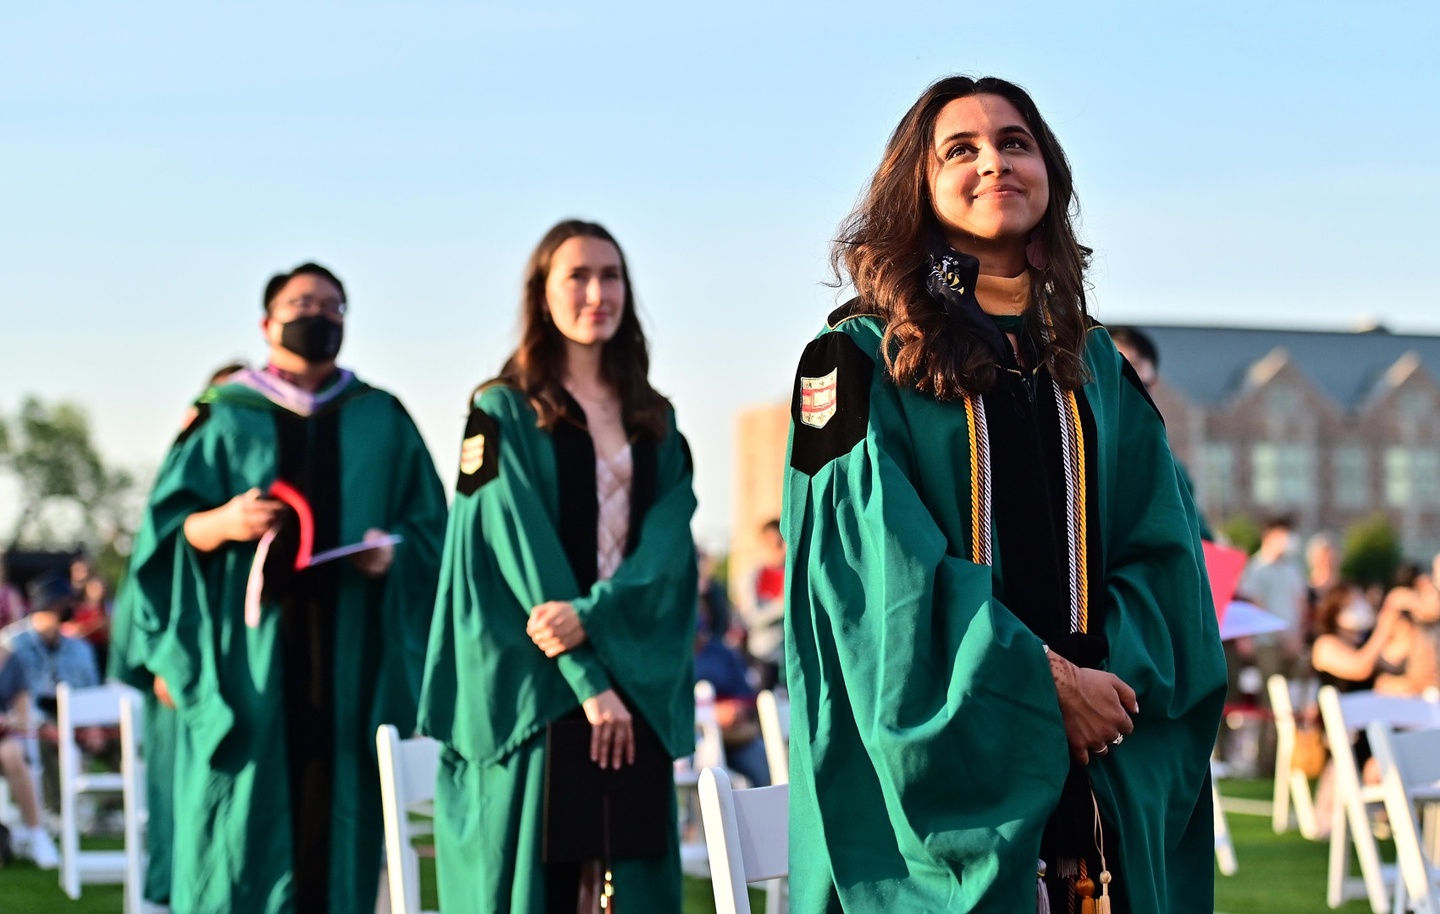 Three students standing in green Commencement gowns outdoors on a blue sky day.